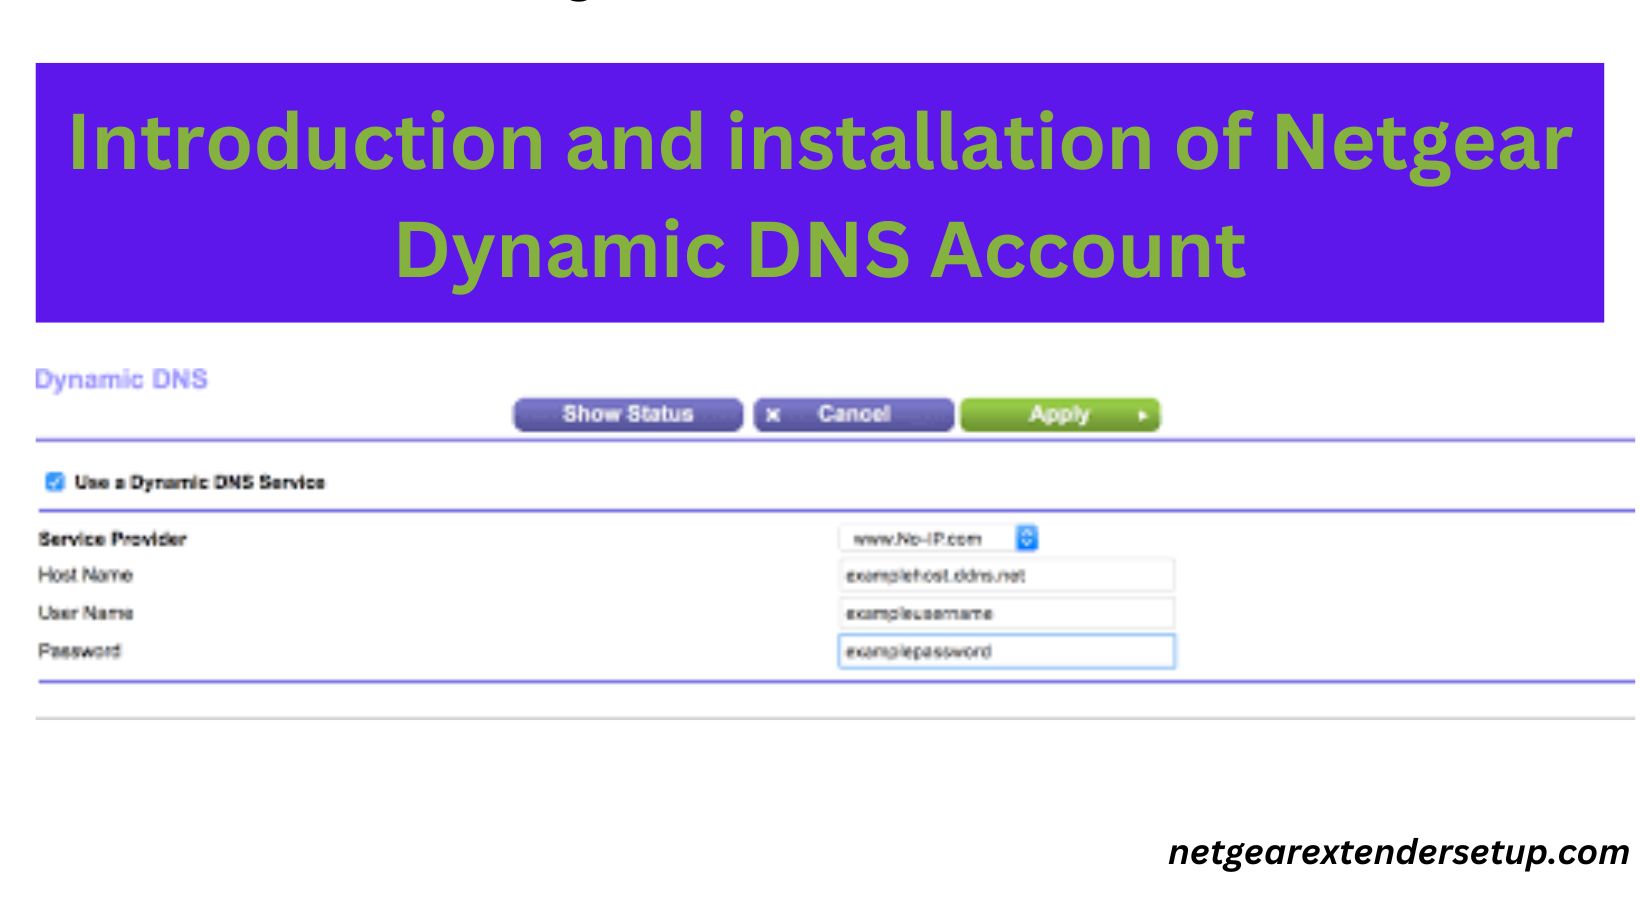 You are currently viewing Introduction and installation of Netgear Dynamic DNS Account